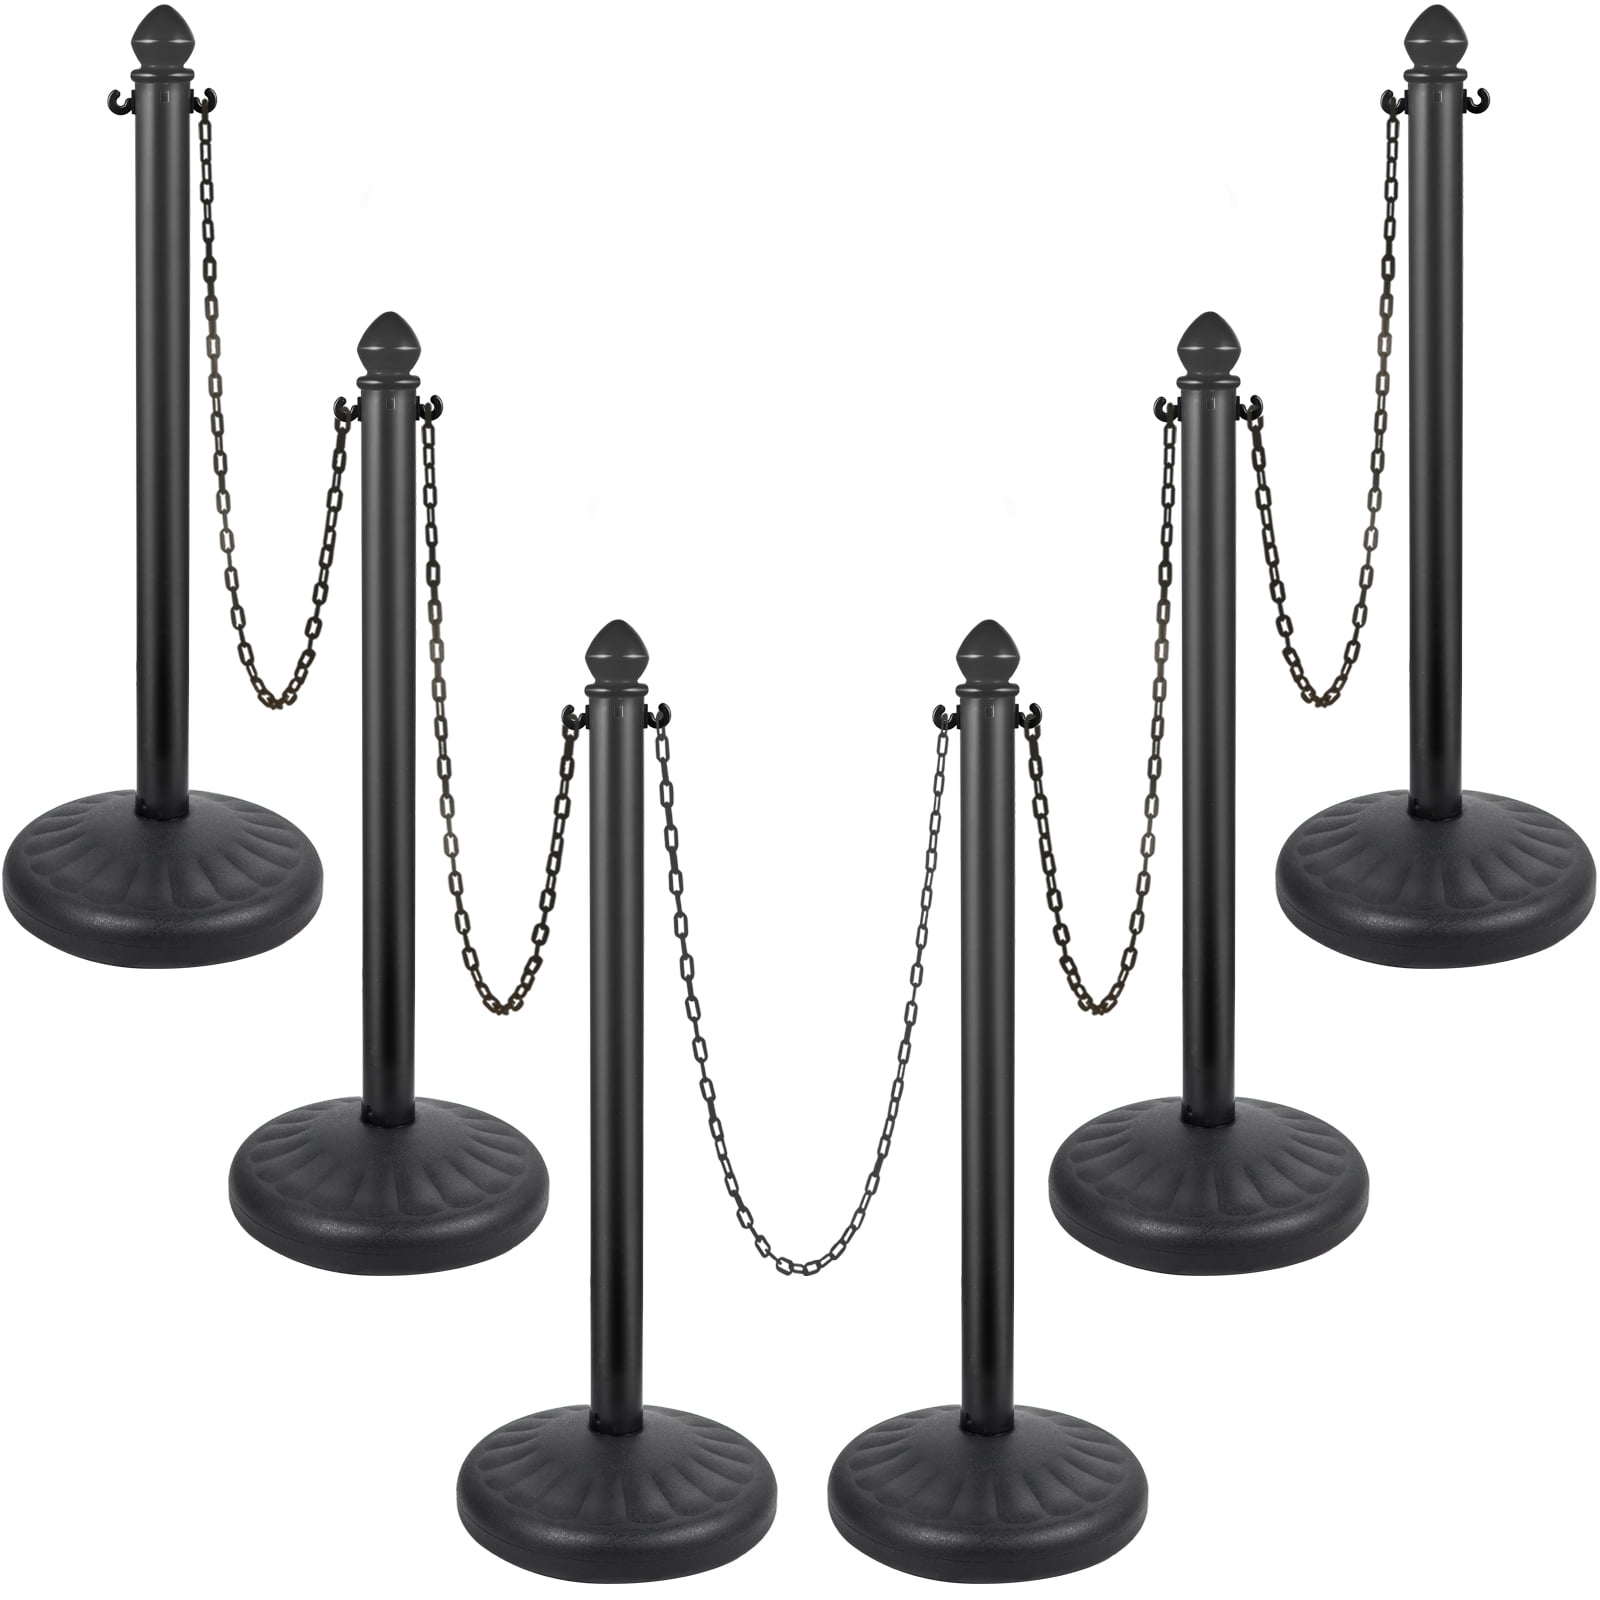 City Mall 6pcs Chain Stanchion Outdoor Stanchion w/ 6 x 39inch Long Chains Supermarket VEVOR Plastic Stanchion Exhibition PE Plastic Crowd Control Barrier for Warning/Crowd Control at Restaurant 